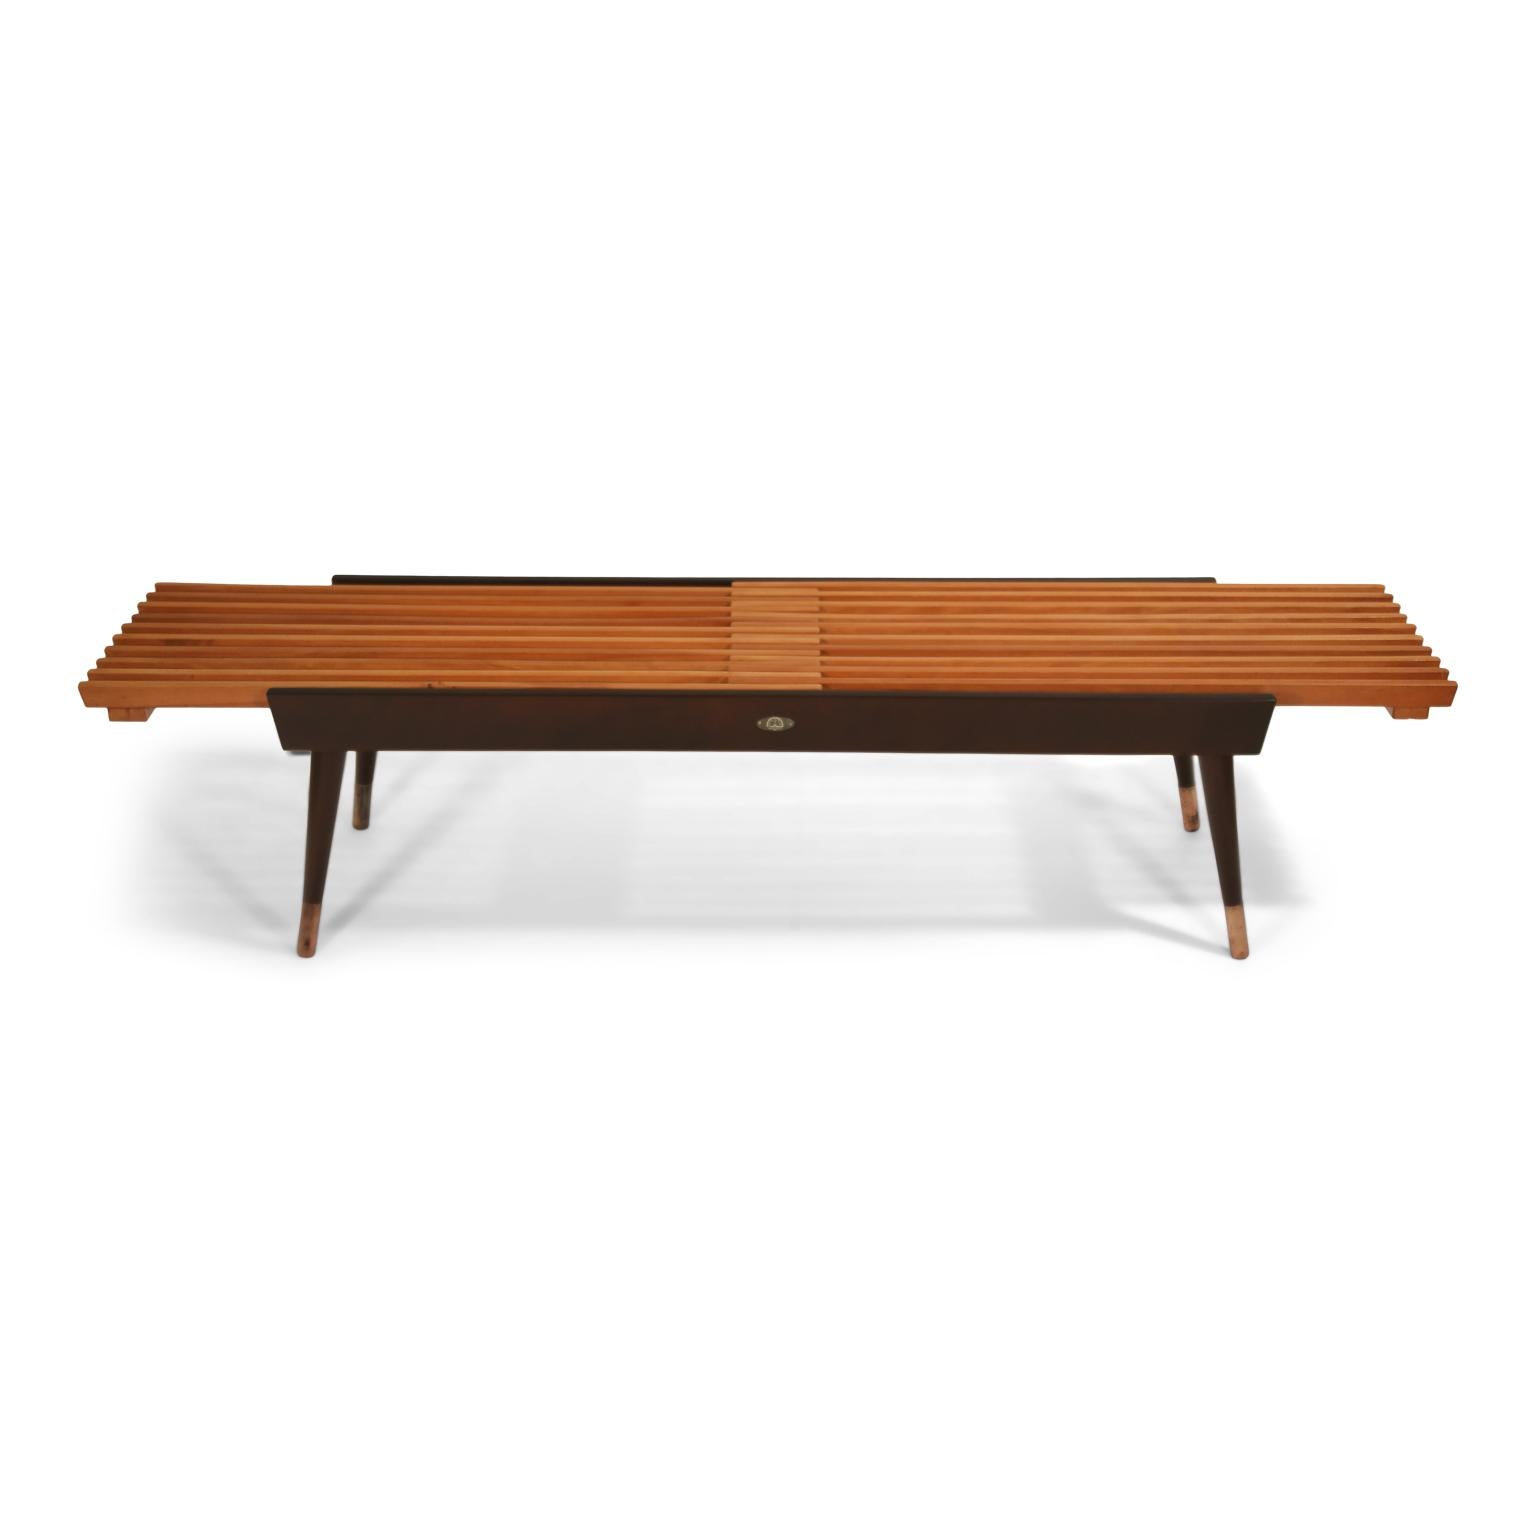 Mid-Century Modern Extendable Slatted Wood Bench or Coffee Table by Maruni, 1950s Hiroshima Japan